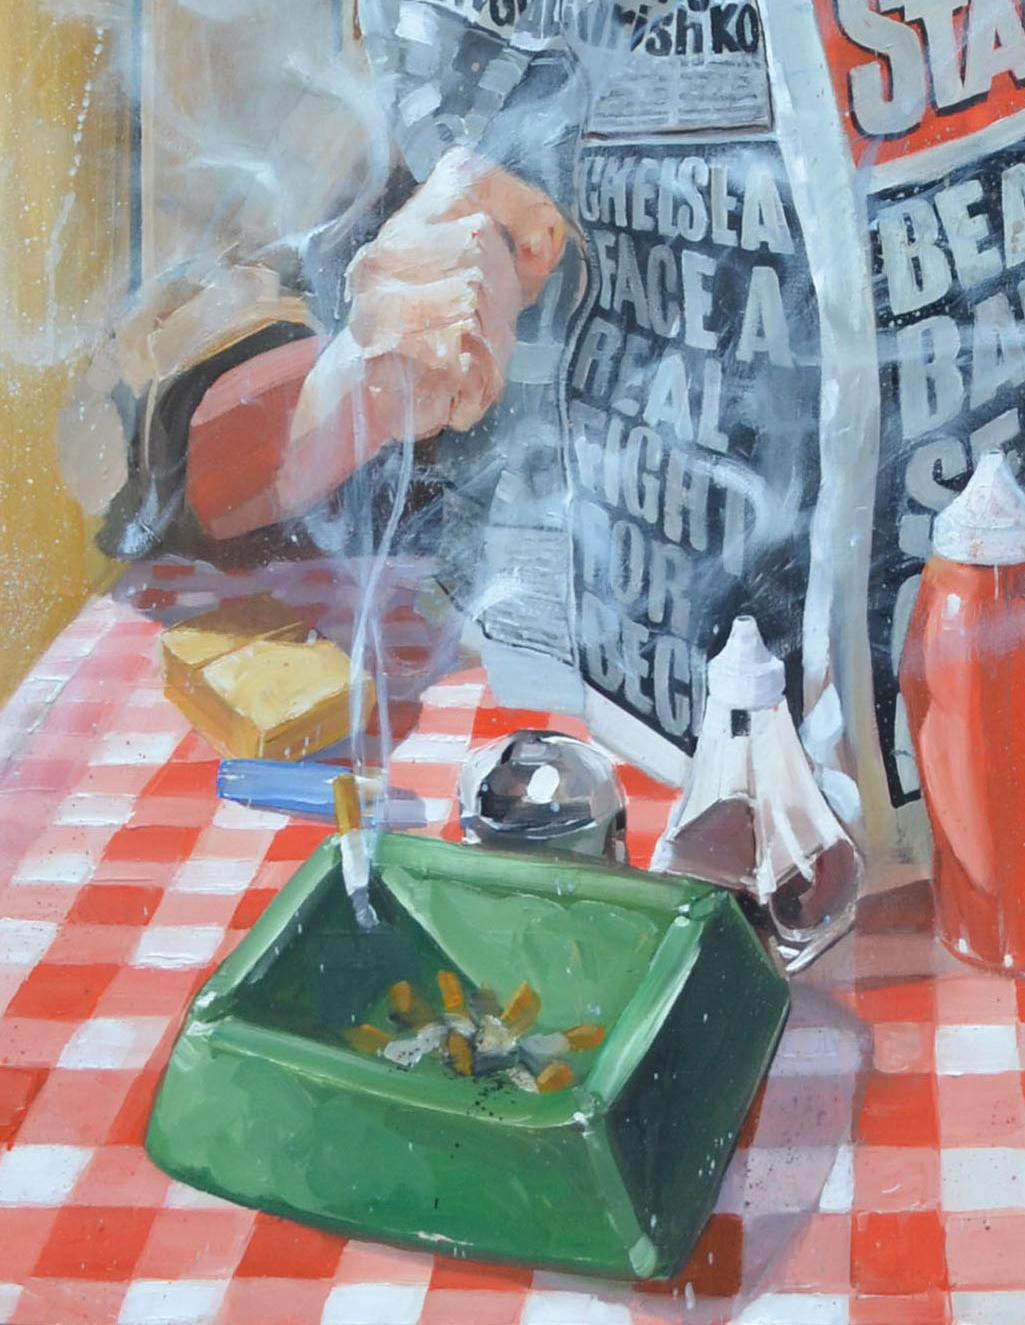 Andrew Hunt's Lobster Red is a 21st Century oil on canvas painting in figurative realism style depicting a man reading his newspaper in a breakfast cafe. Hunt’s blend of painterly realism with his understanding of human character gives him the